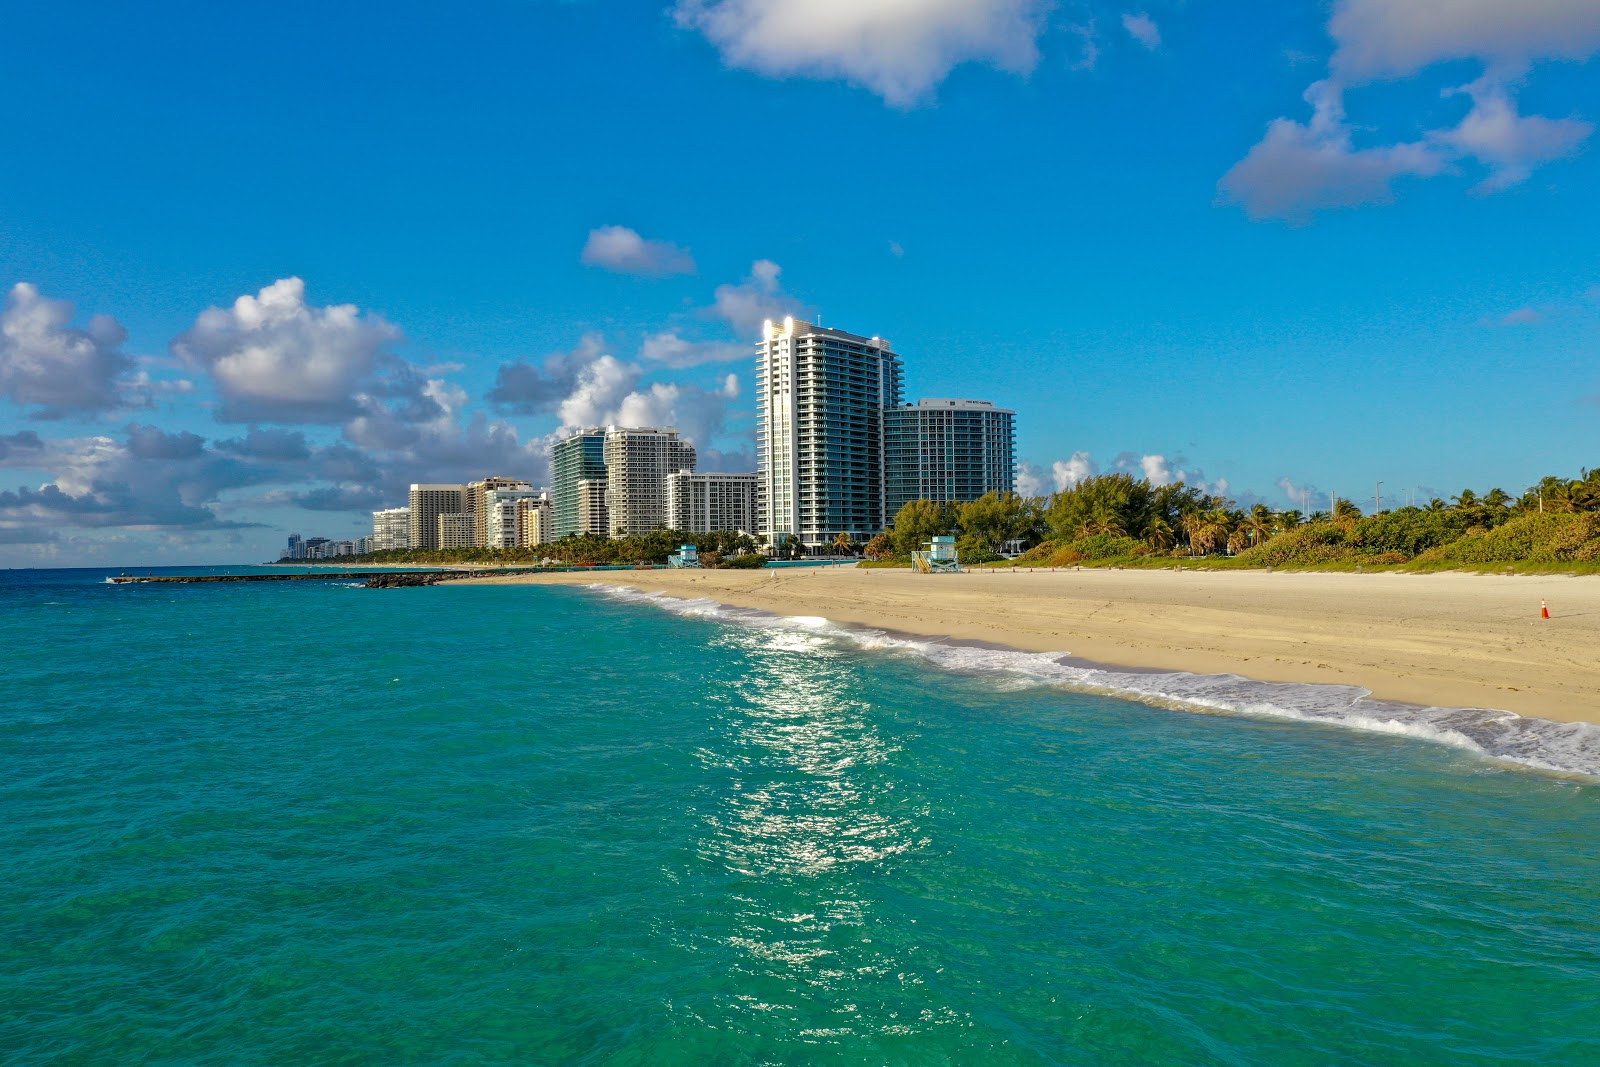 Photo of Haulover beach - good pet friendly spot for vacation